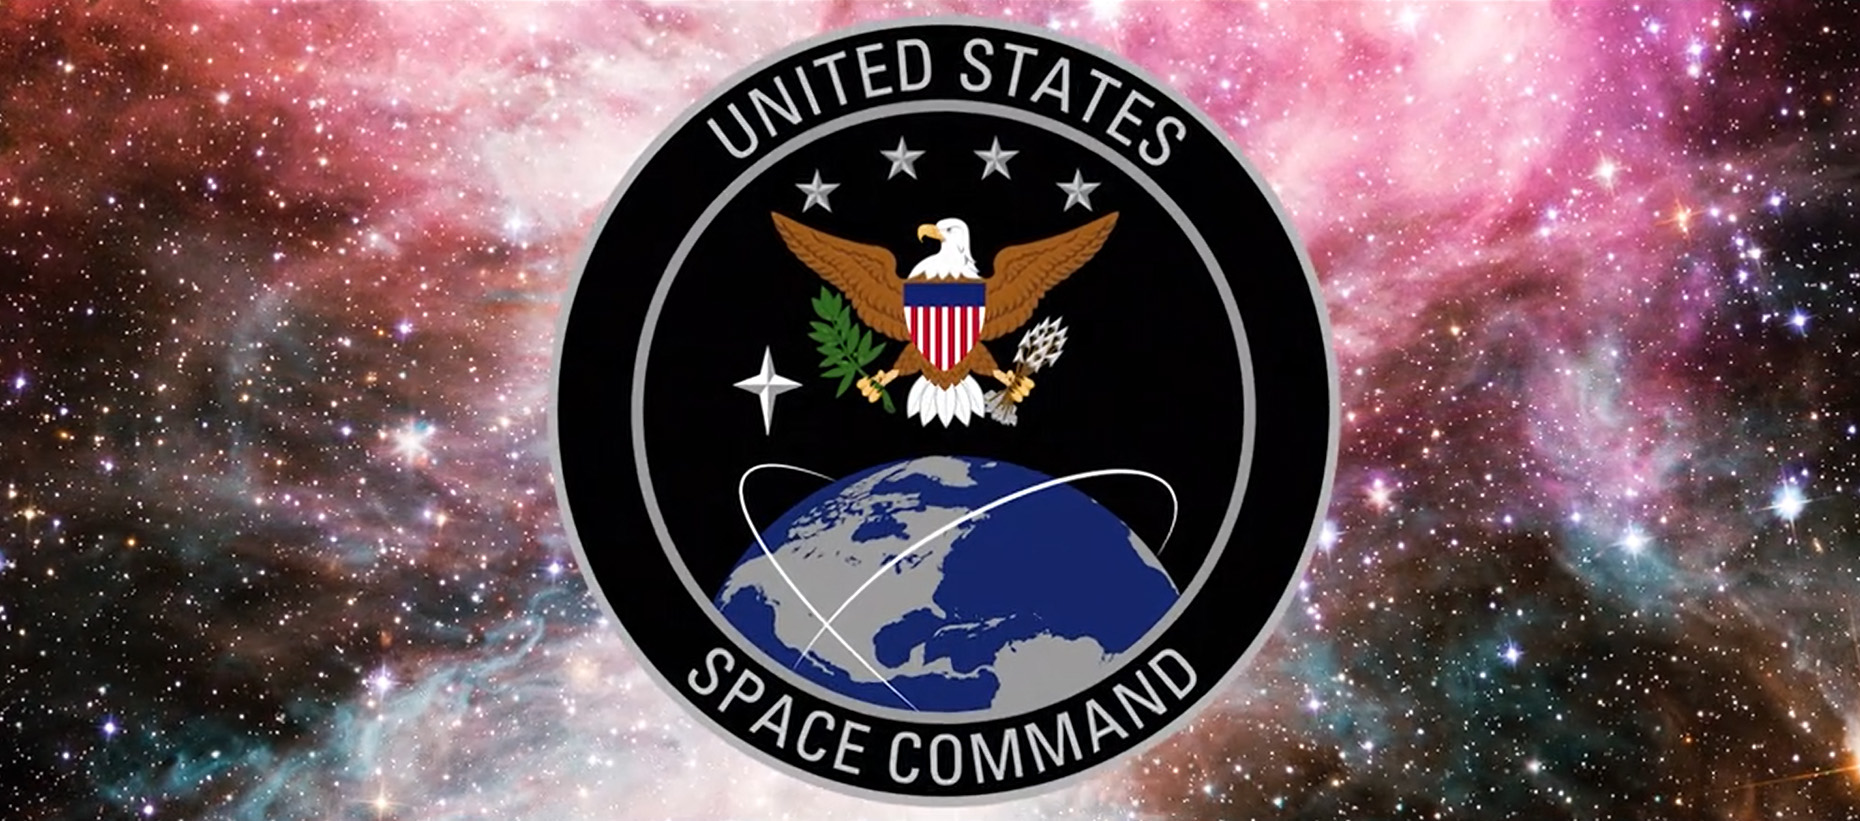 PHOTO: The U.S. Space Command seal.